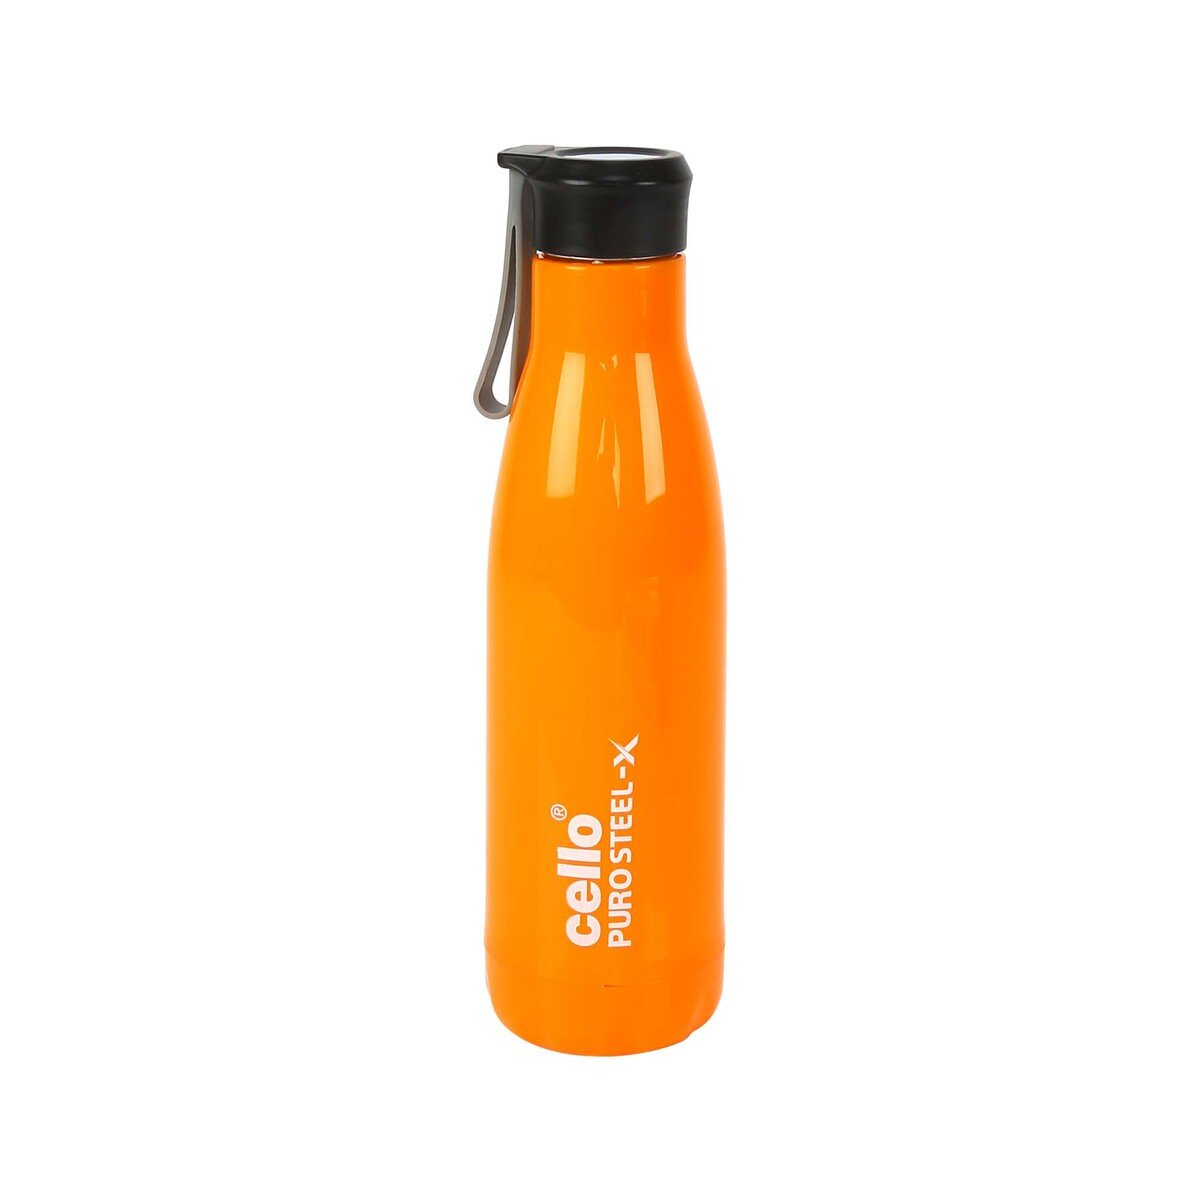 Cello Stainless Steel Water Bottle PuroXCooper 600ml Assorted